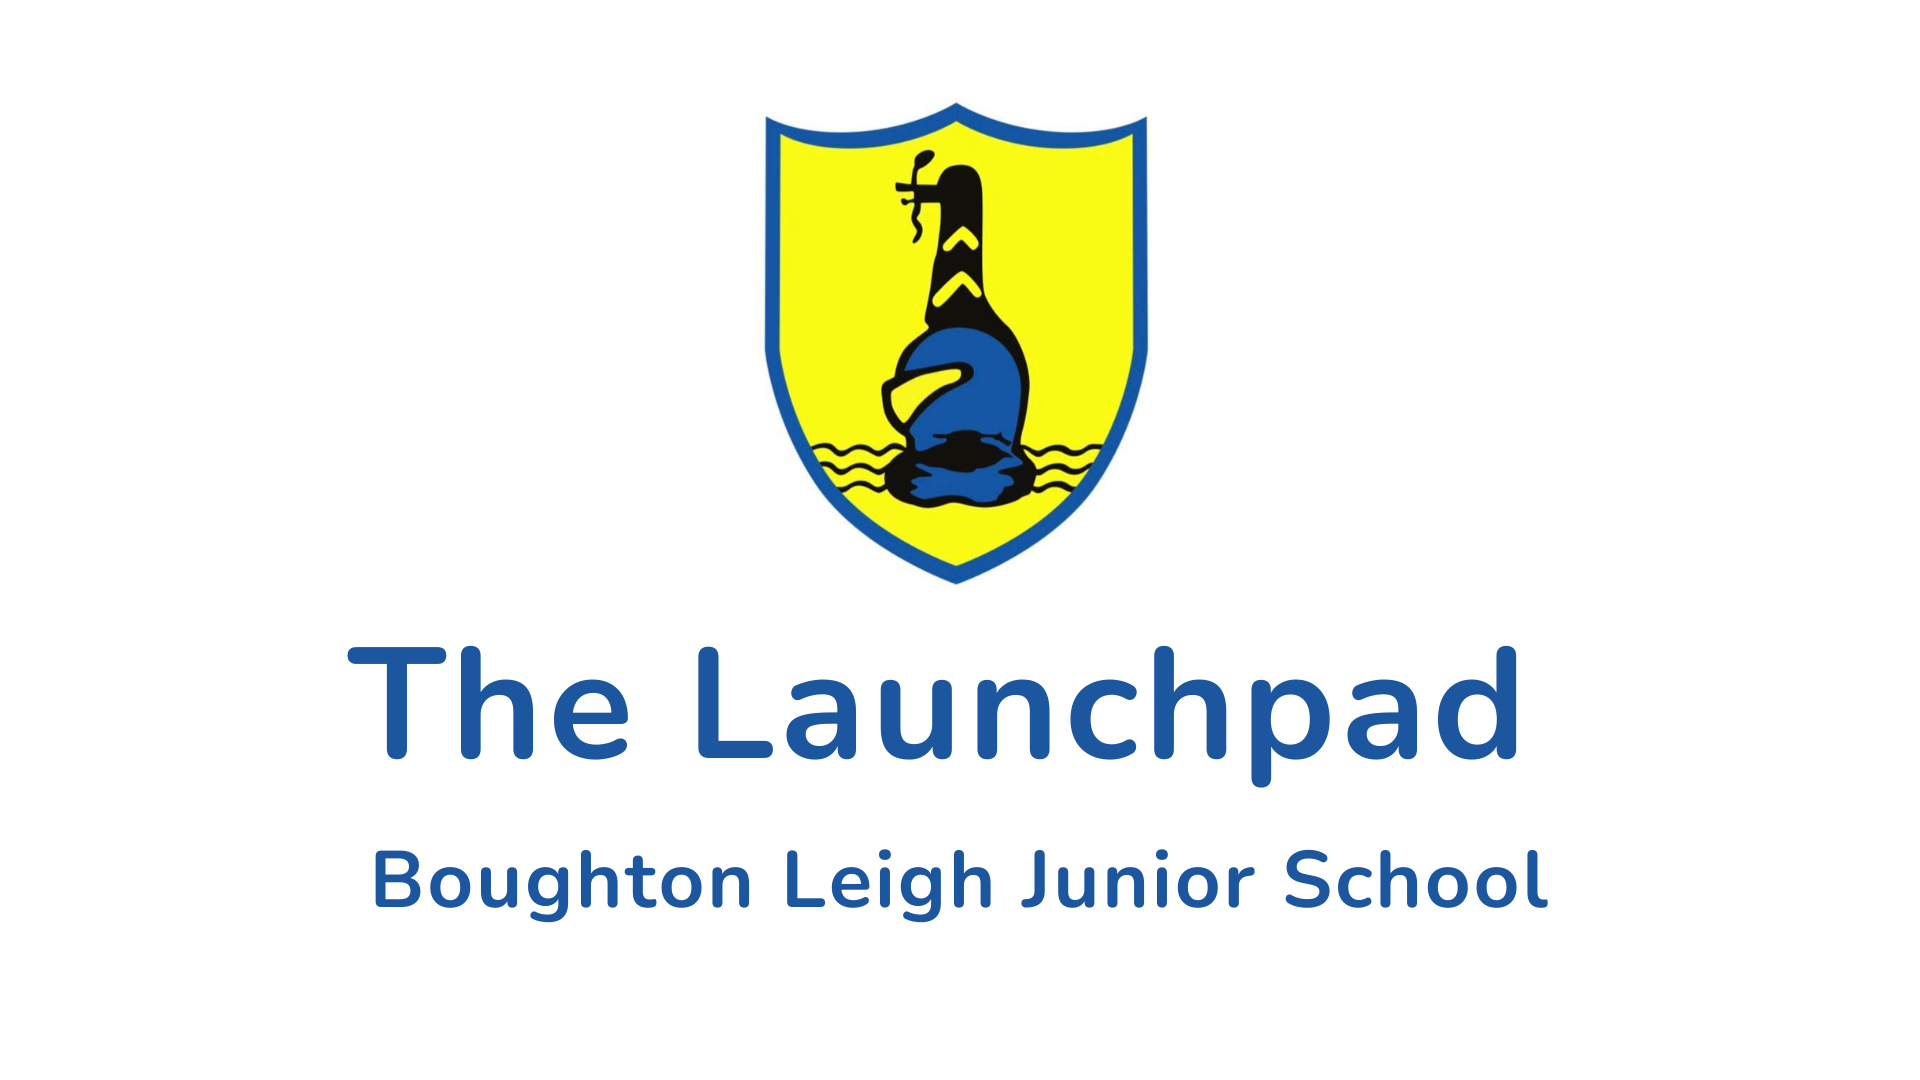 The Launchpad at Boughton Leigh Junior School